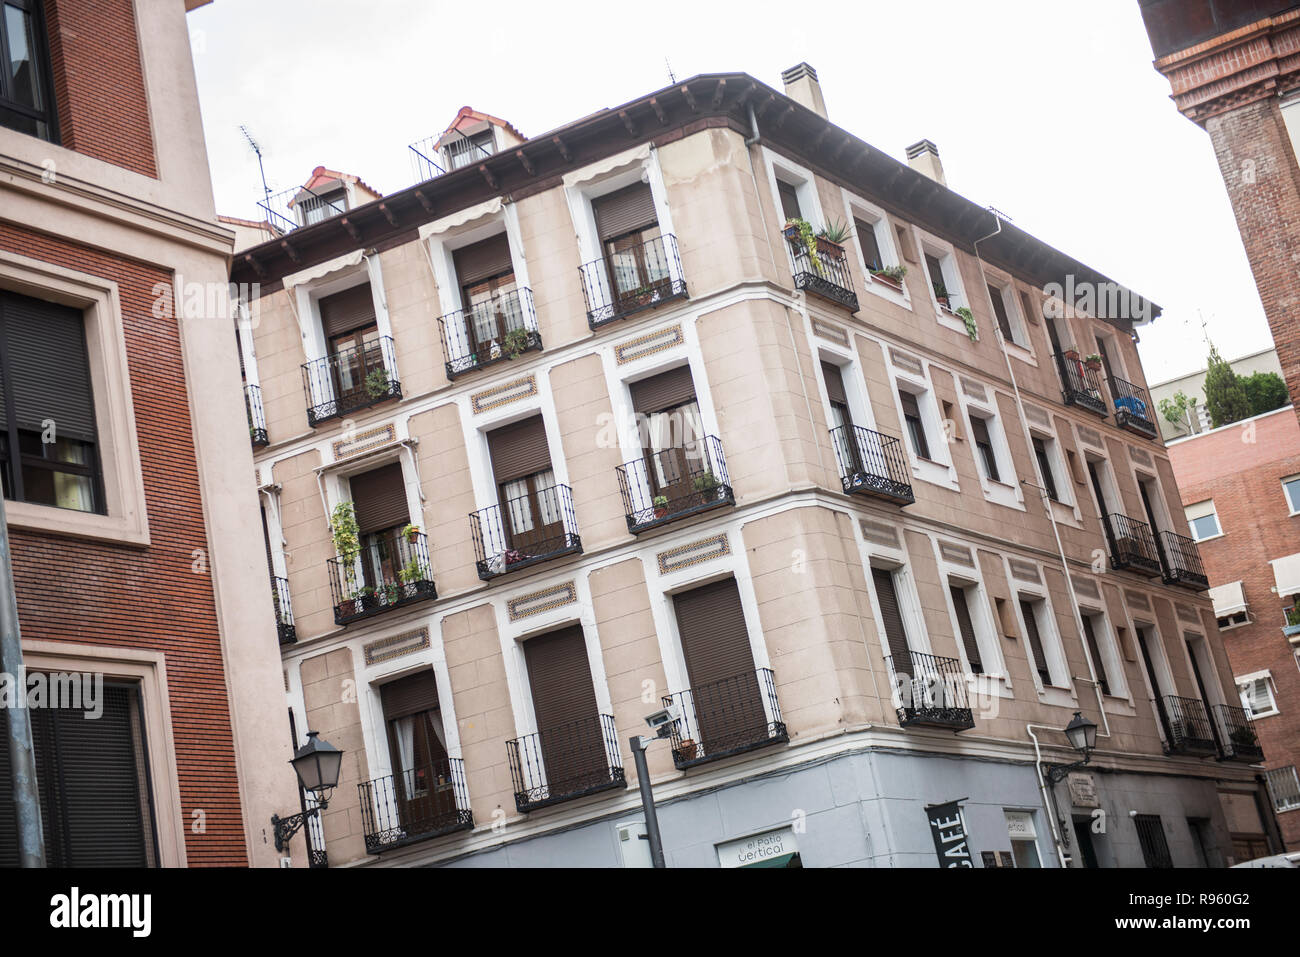 Exterior of a local building in Spain. The building seems to be a mix of old and modern architecture. The Streets seem to be narrow. It seems to be a  Stock Photo